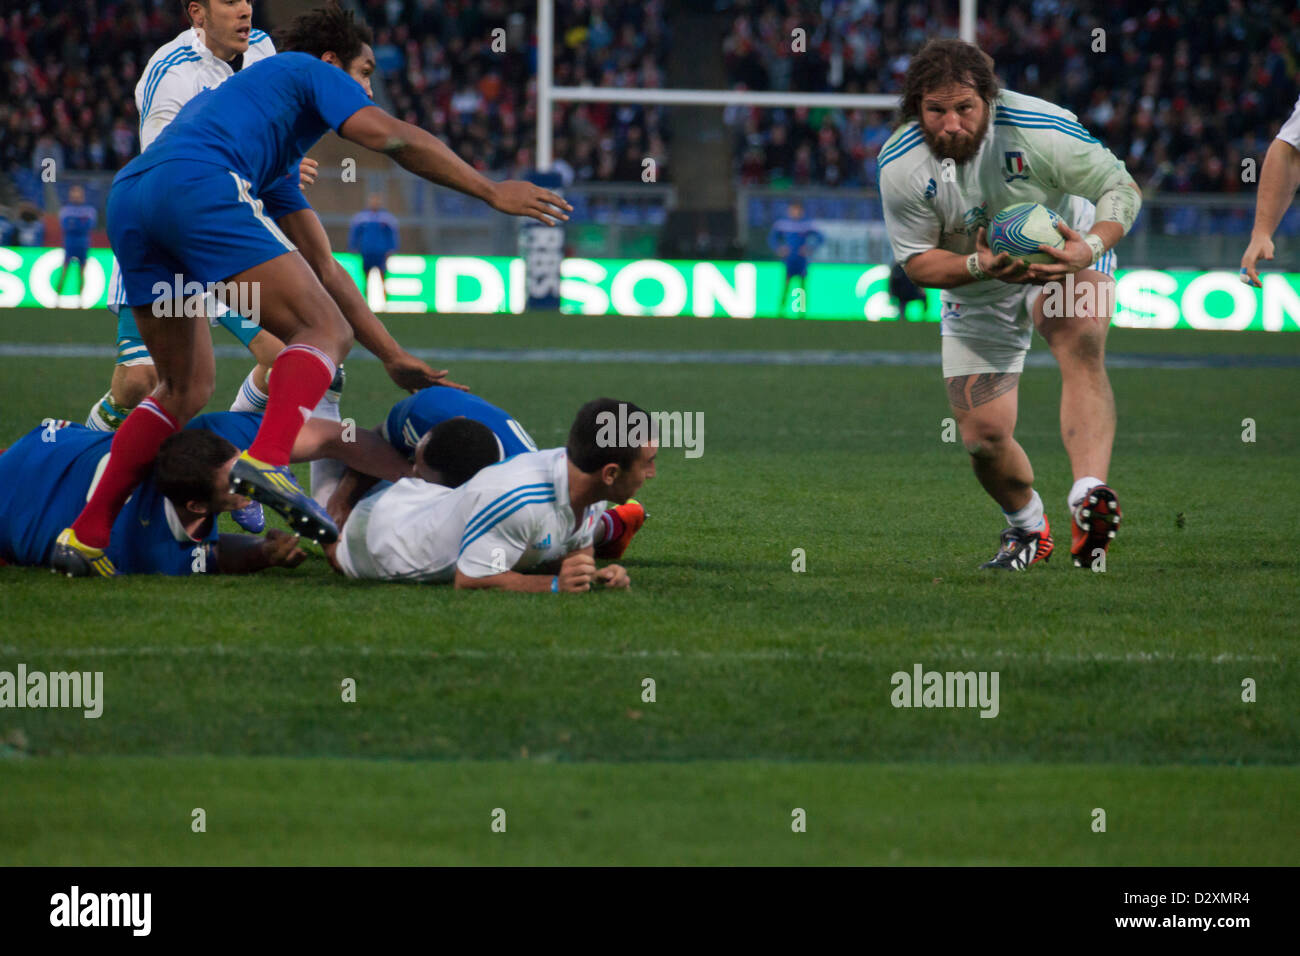 February 3rd 2013. Rome, Italy. Six Nations rugby. Italy vs France. Martin Castrogiovanni scores in the 57th minute after receiving the ball from Luciano Orquera (lying on ground). Stock Photo